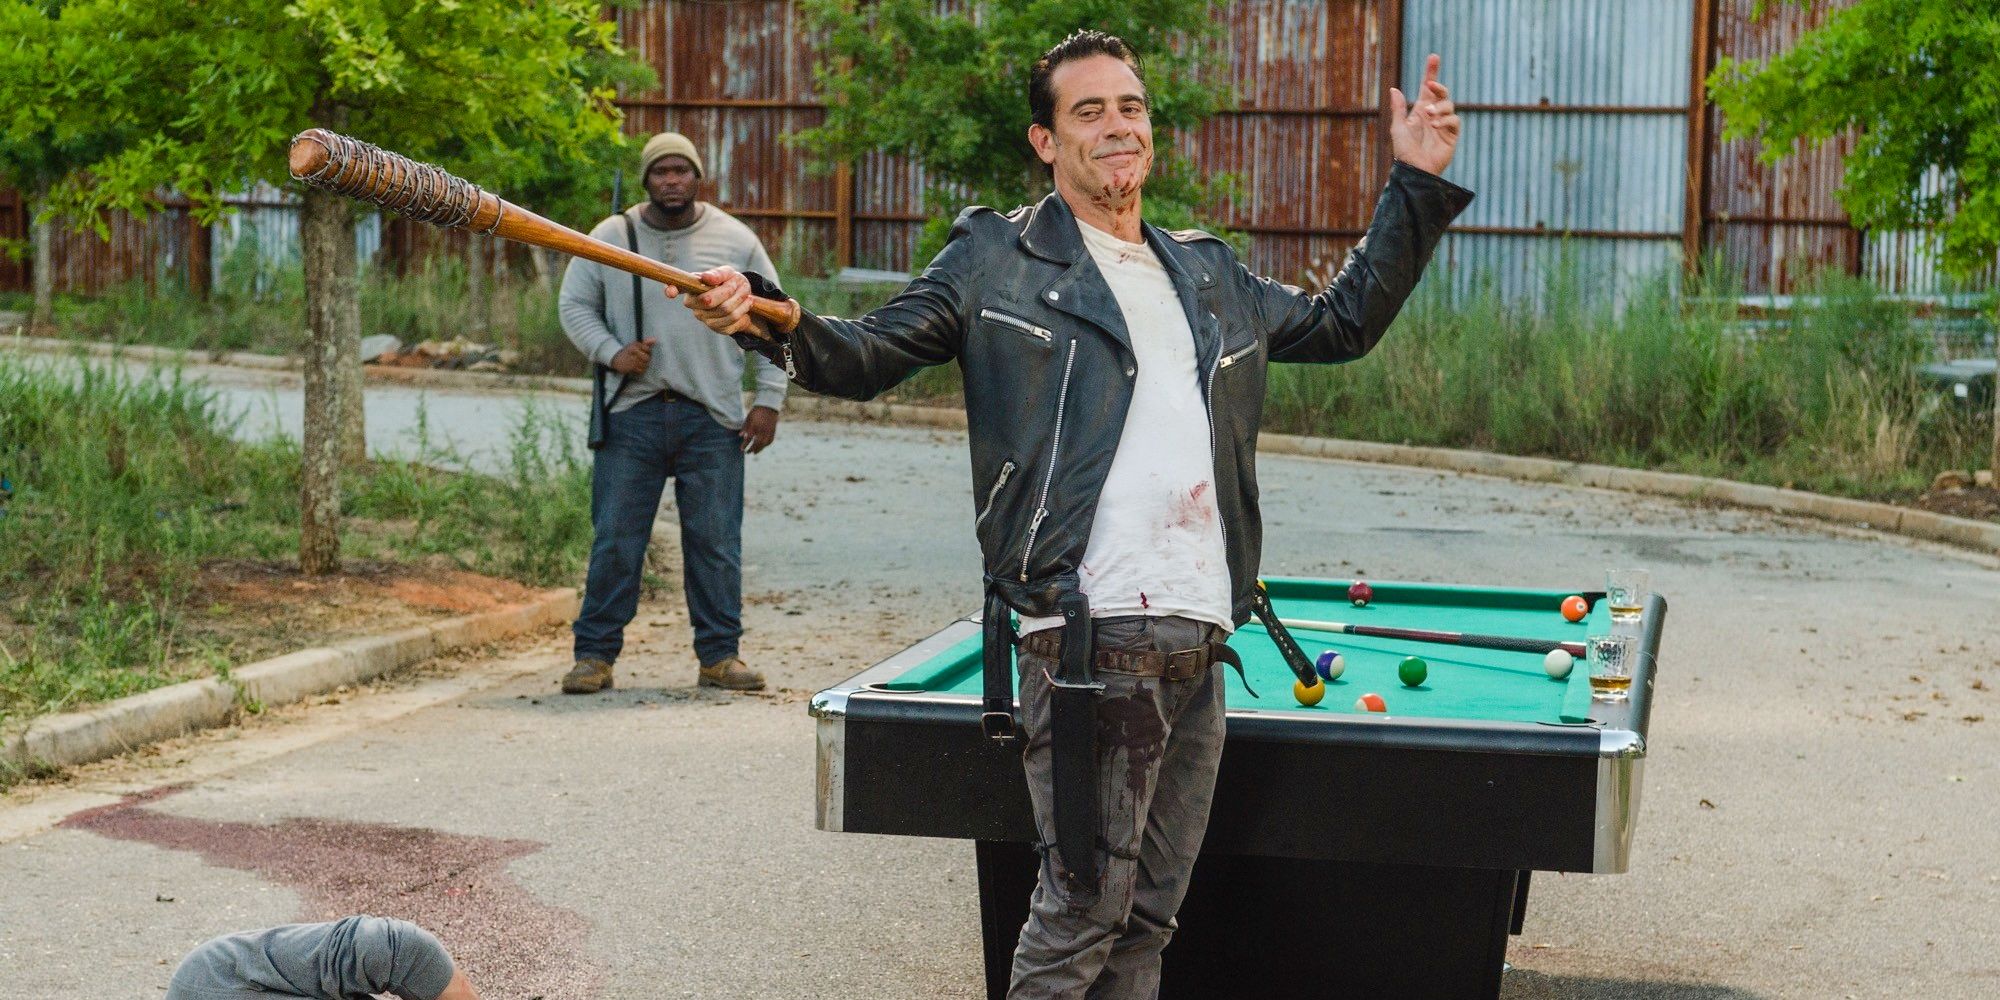 The Walking Dead Negan’s Transformation Over The Years (In Pictures)